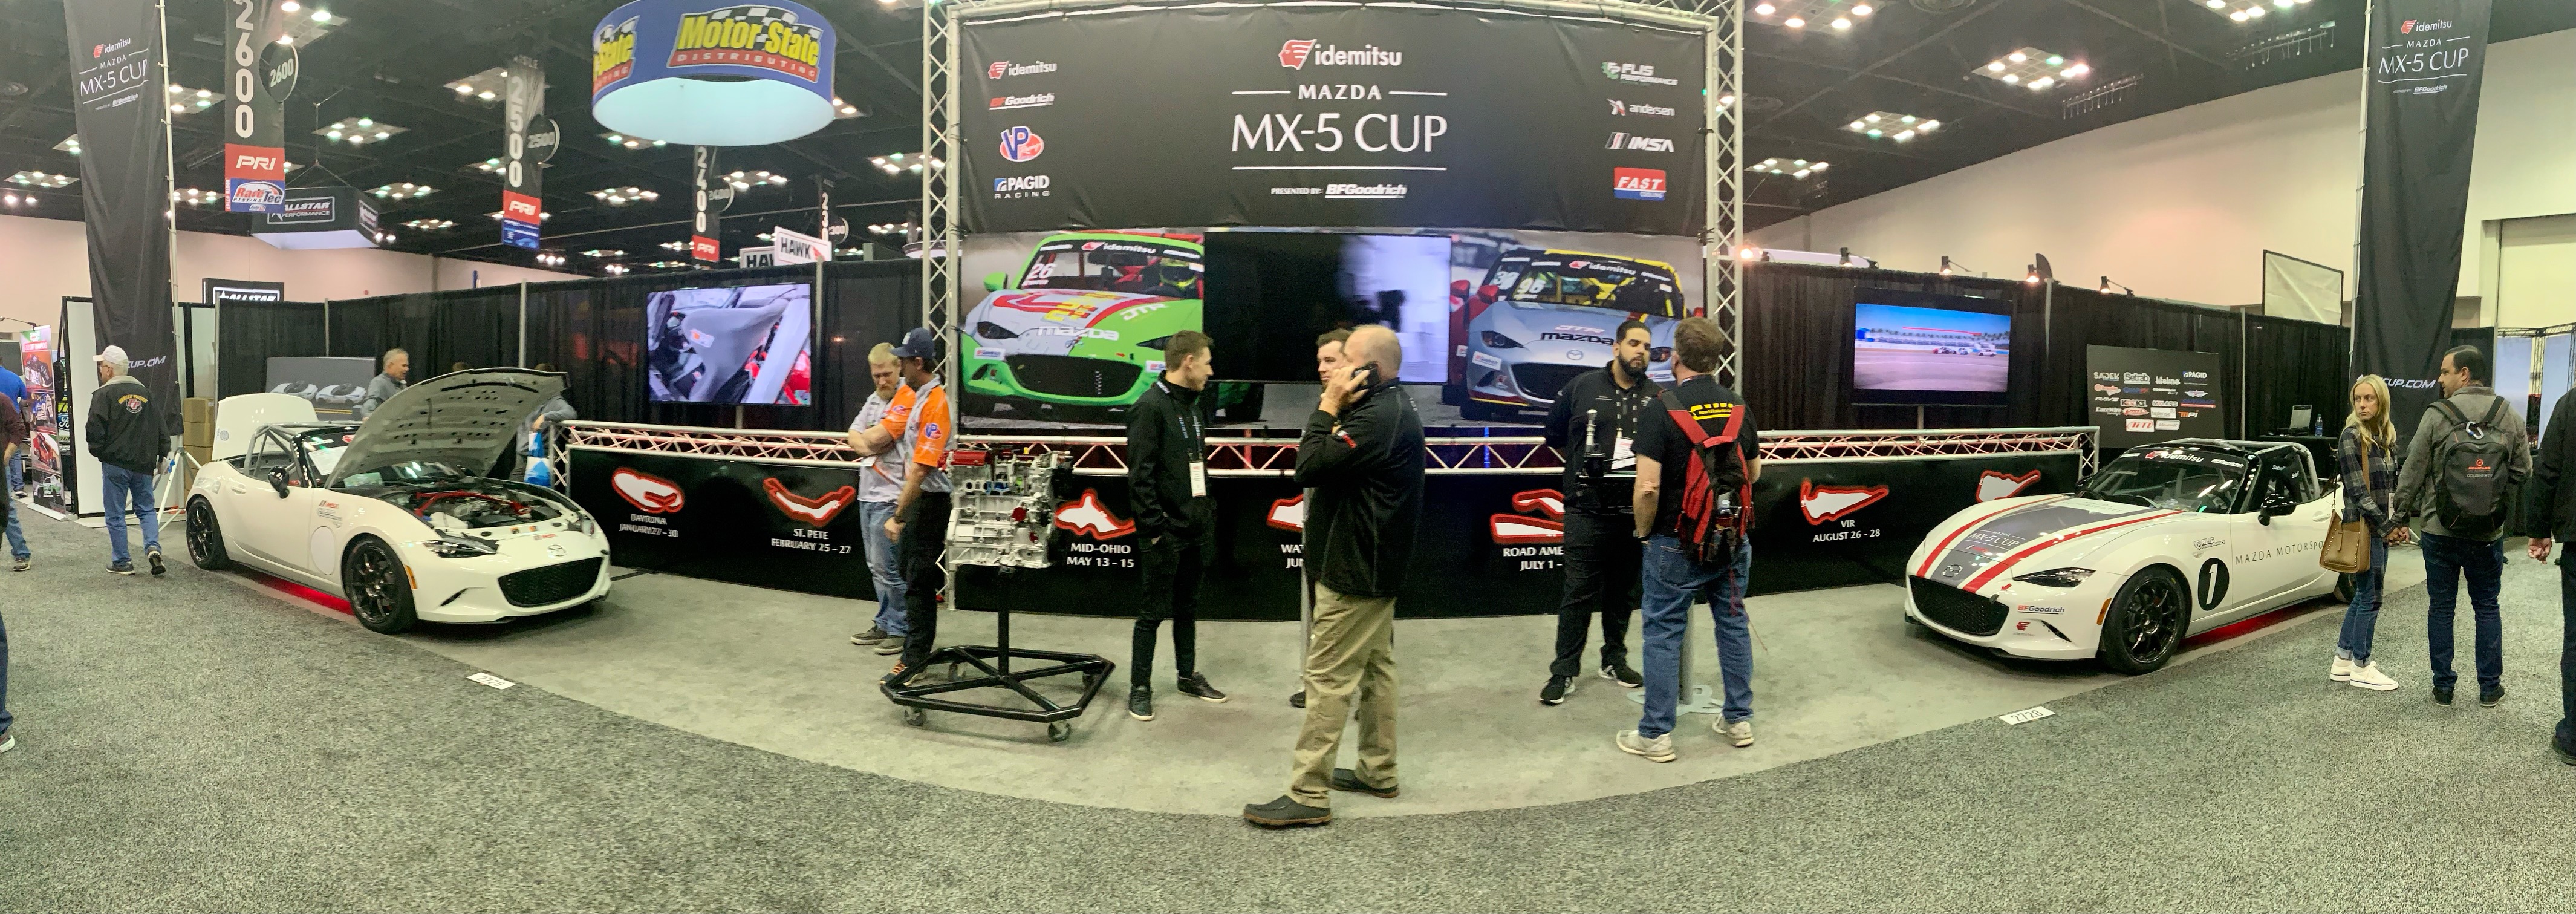 MX-5 Cup had quite the display at PRI this year!